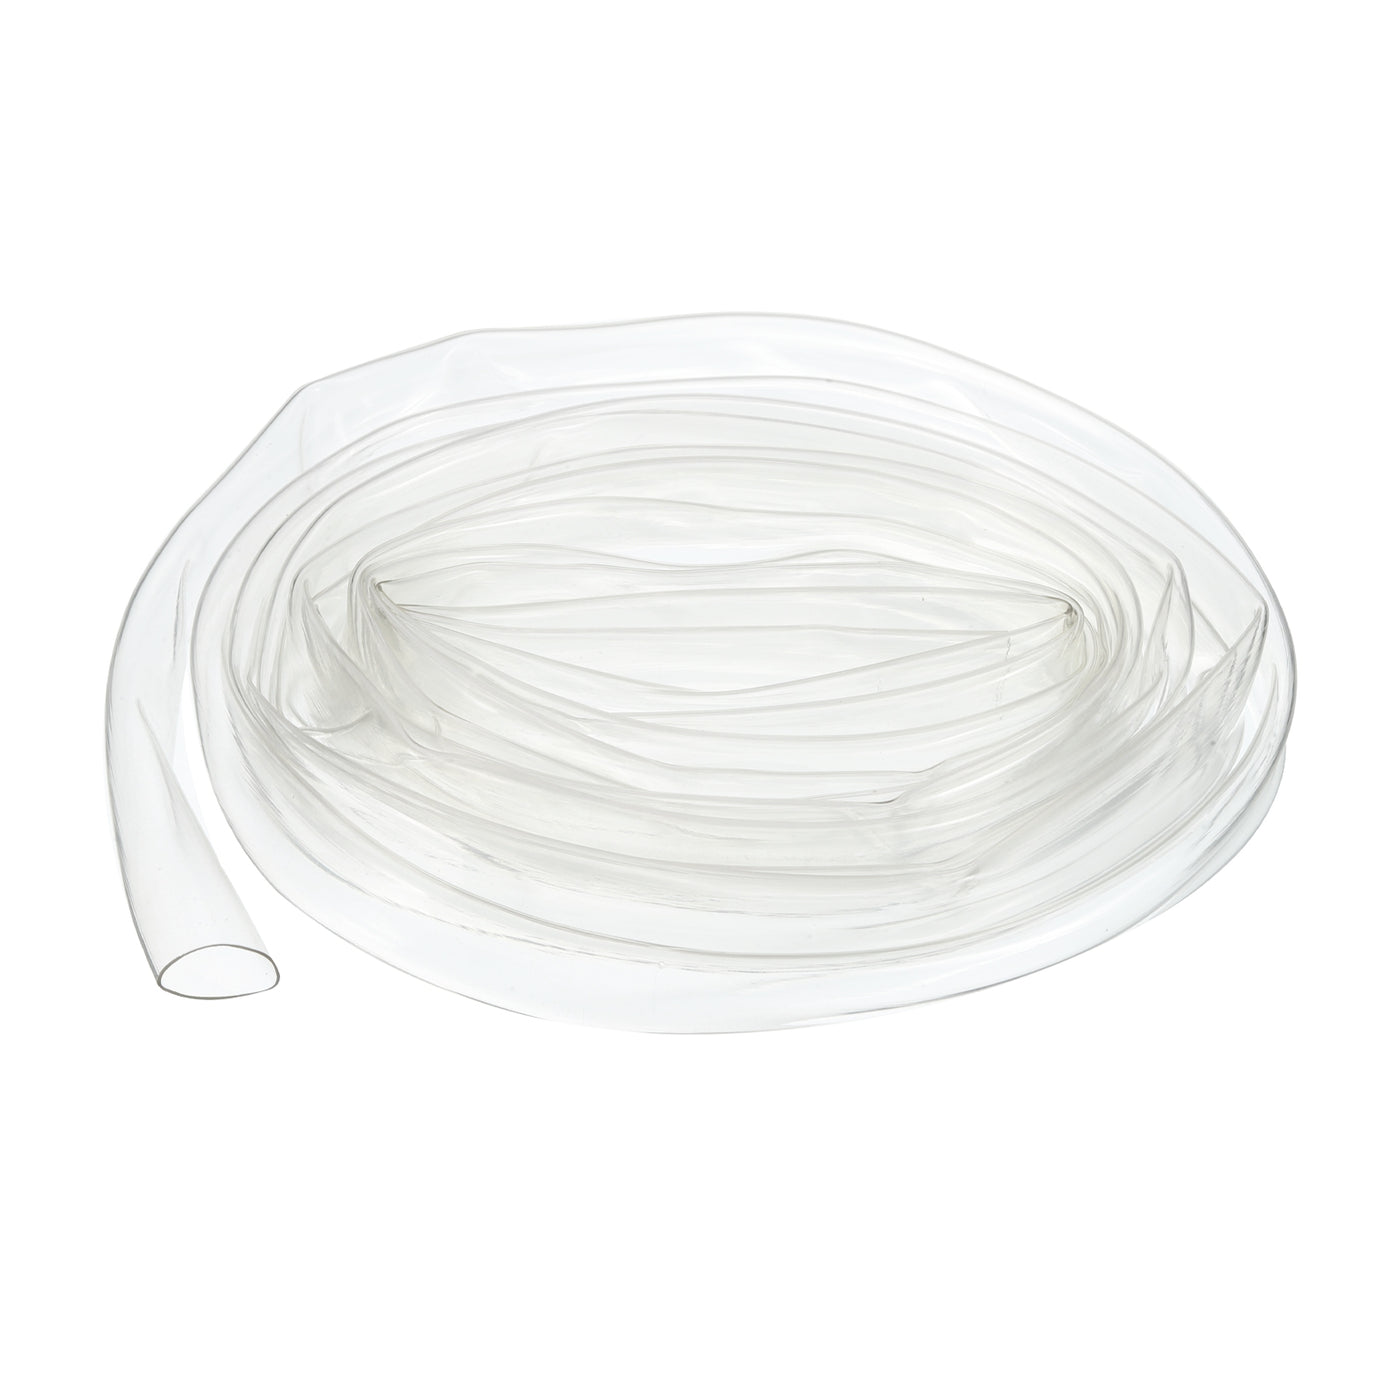 uxcell Uxcell Clear PVC Tube Wire Harness Tubing, 1/2-inch(12mm) ID 10ft Sleeve for Wire Sheathing Wire Protection